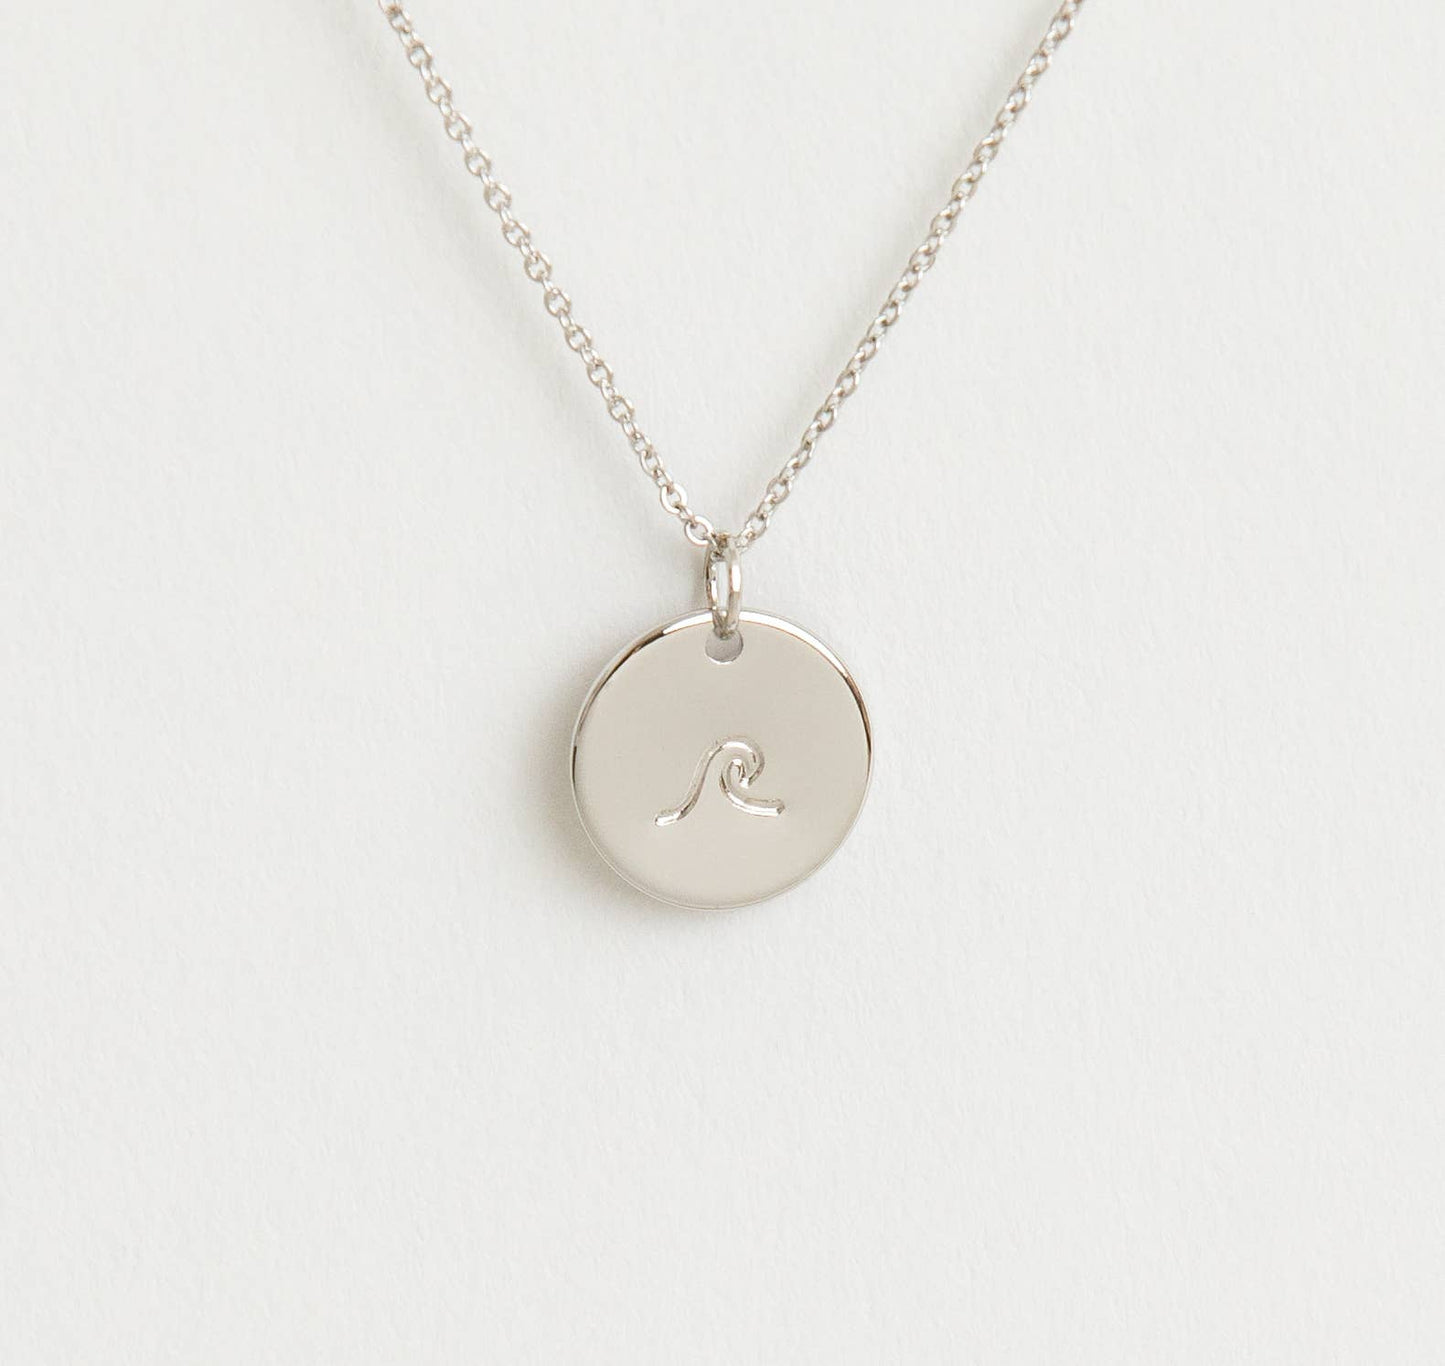 Wave Charm Necklace: Silver Charm / Silver Chain